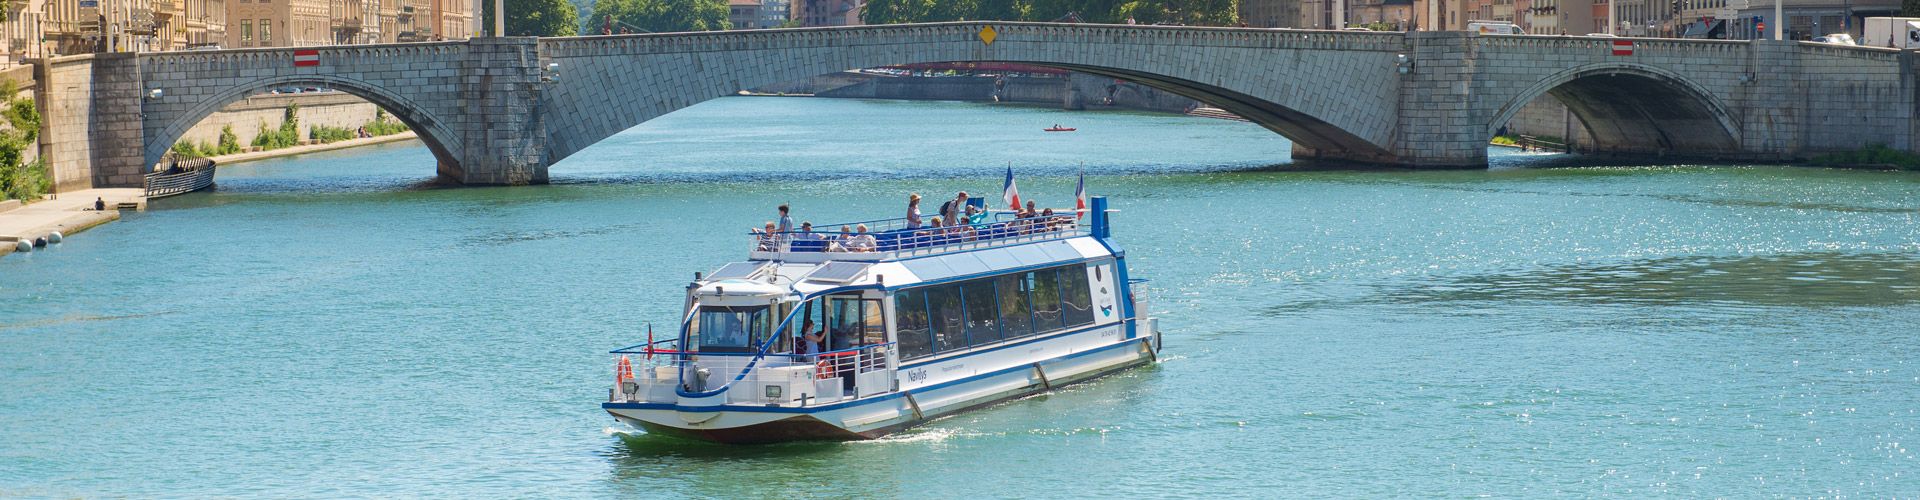 Lyon in a different way - Sightseeing cruise